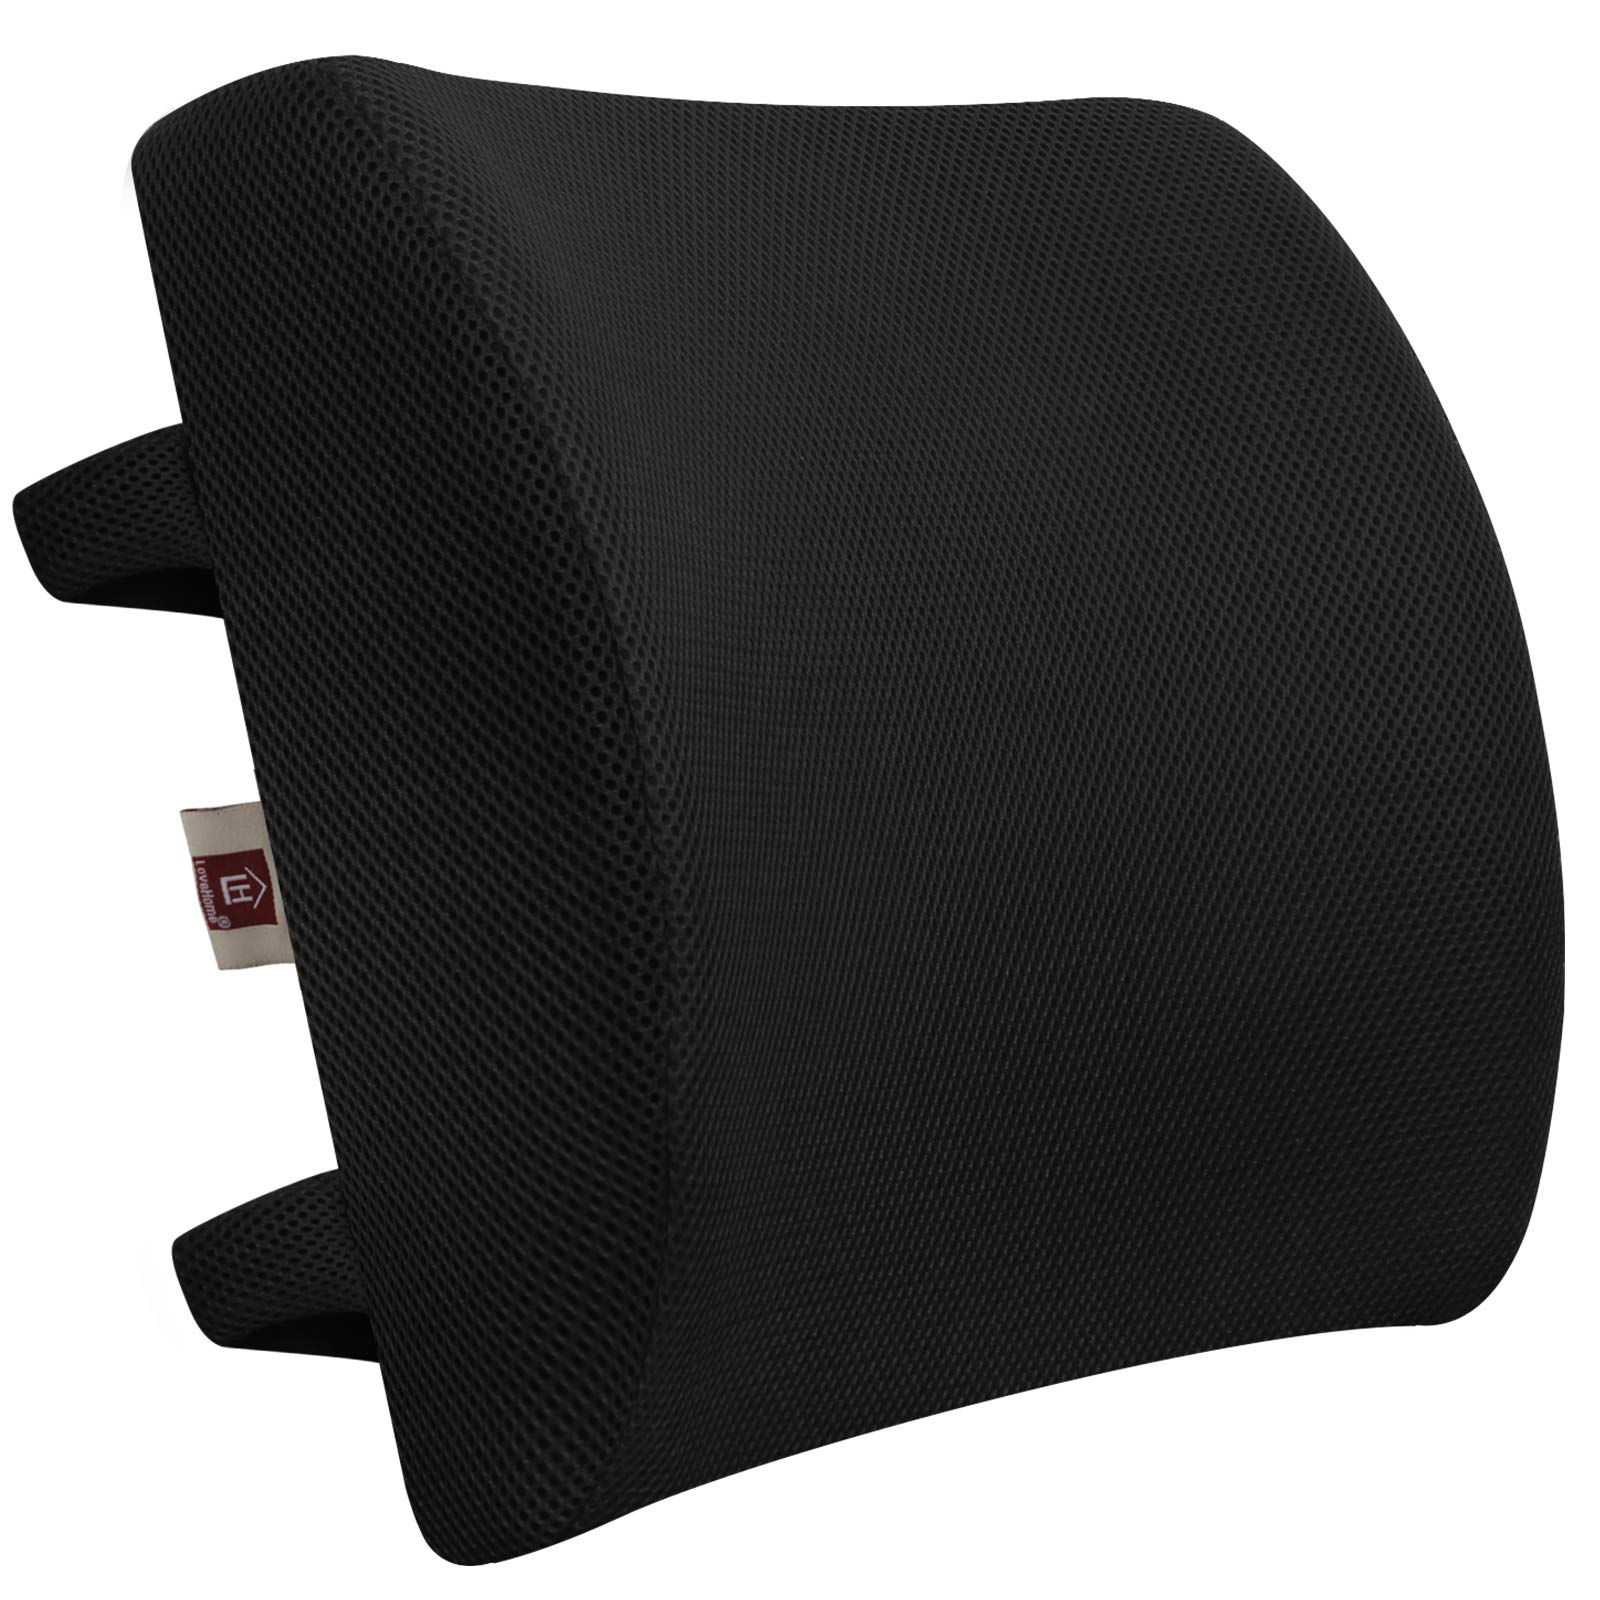 LOVEHOME Lumbar Support Pillow for Chair and Car, Back Support for Office Chair Memory Foam Cushion with Mesh Cover for Back Pain Relief - Black